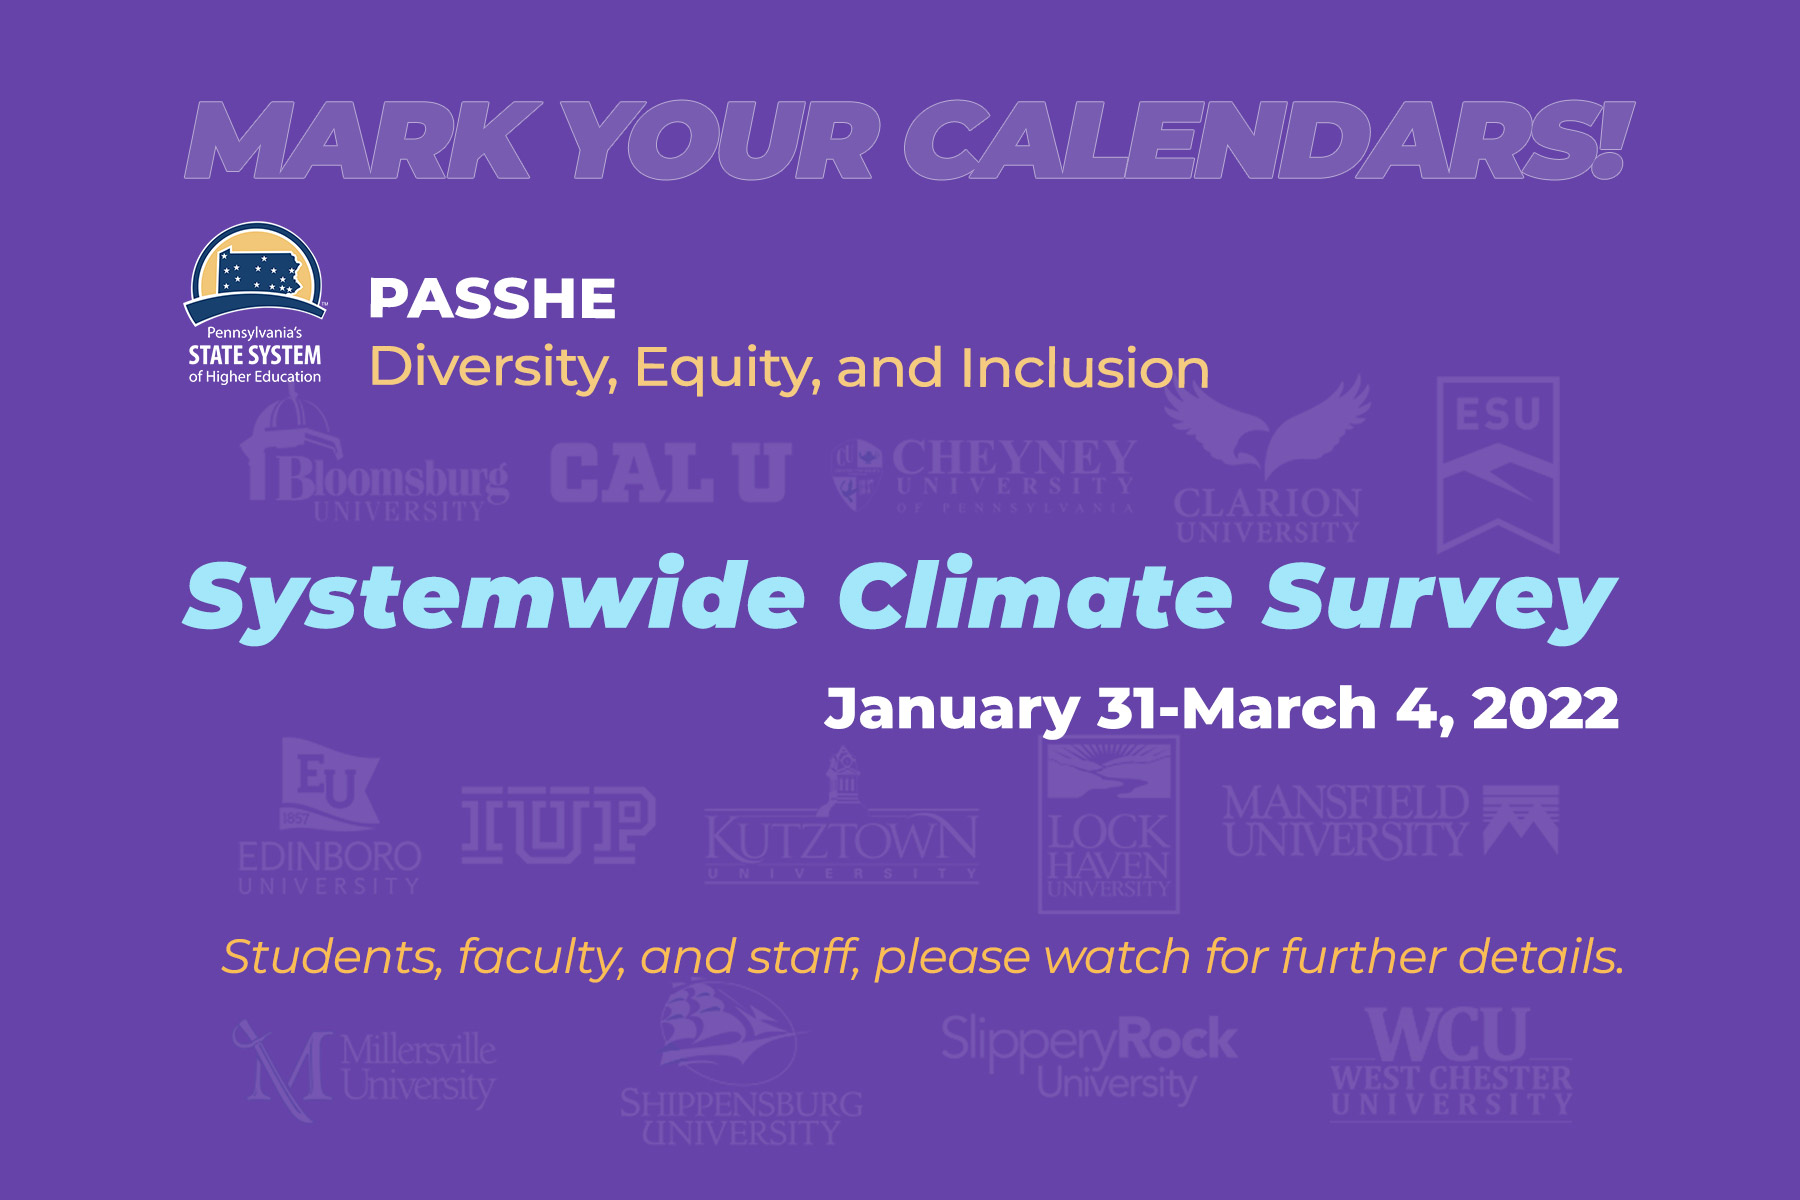 Systemwide Climate Survey - January 31 through March 4, 2022